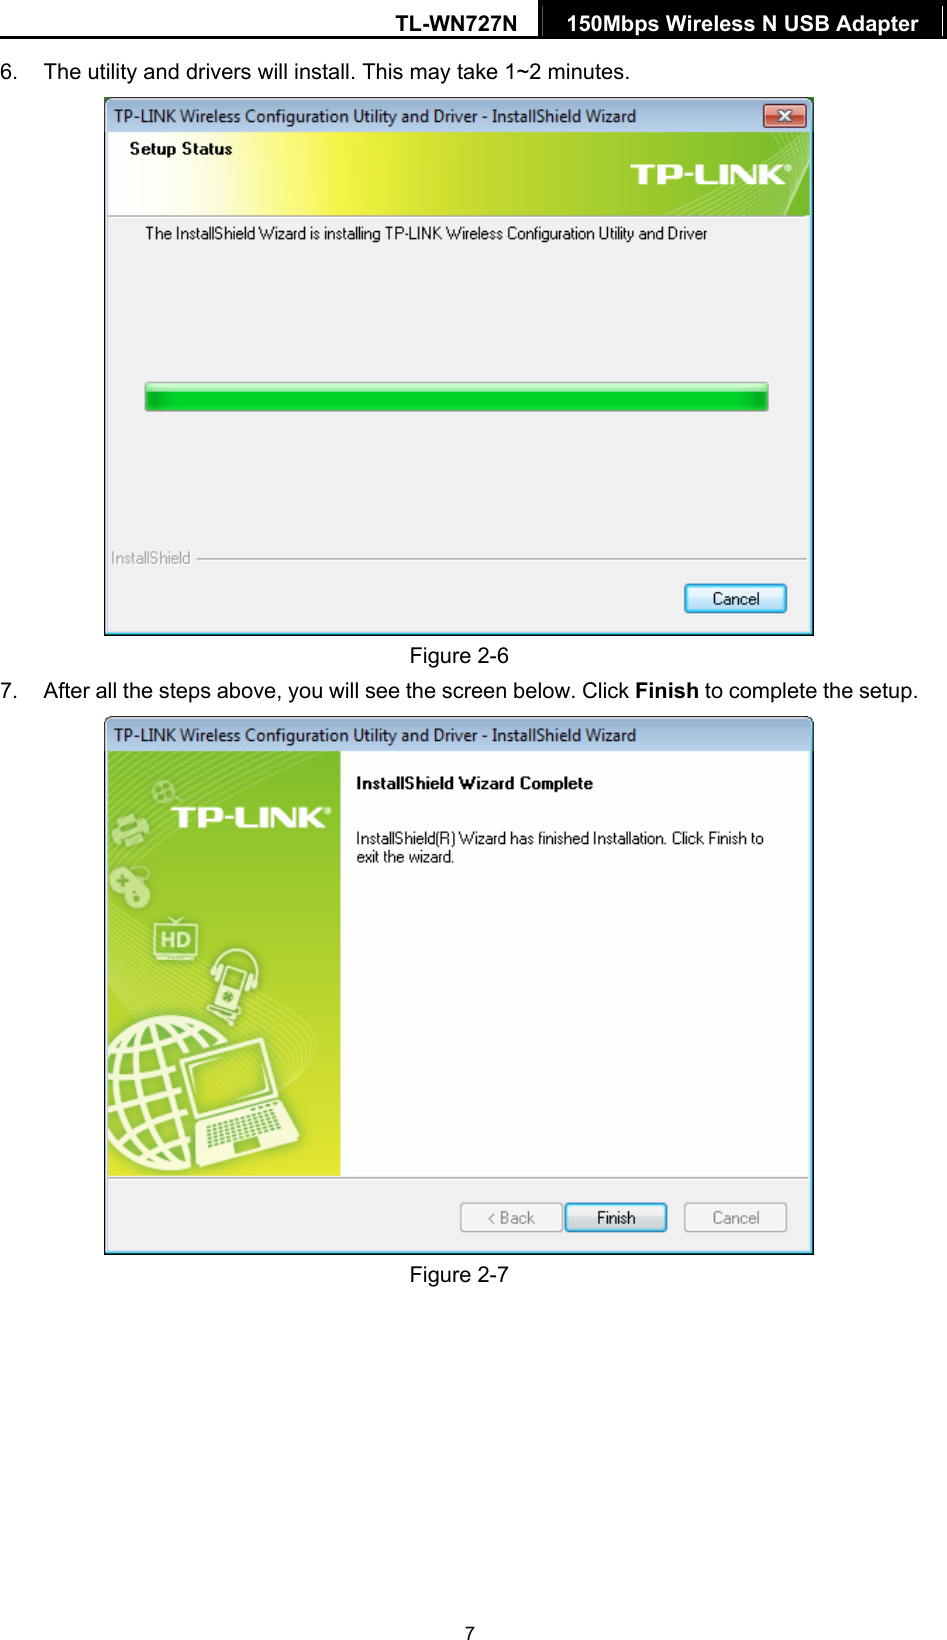 TL-WN727N  150Mbps Wireless N USB Adapter   76.  The utility and drivers will install. This may take 1~2 minutes.  Figure 2-6 7.  After all the steps above, you will see the screen below. Click Finish to complete the setup.  Figure 2-7 